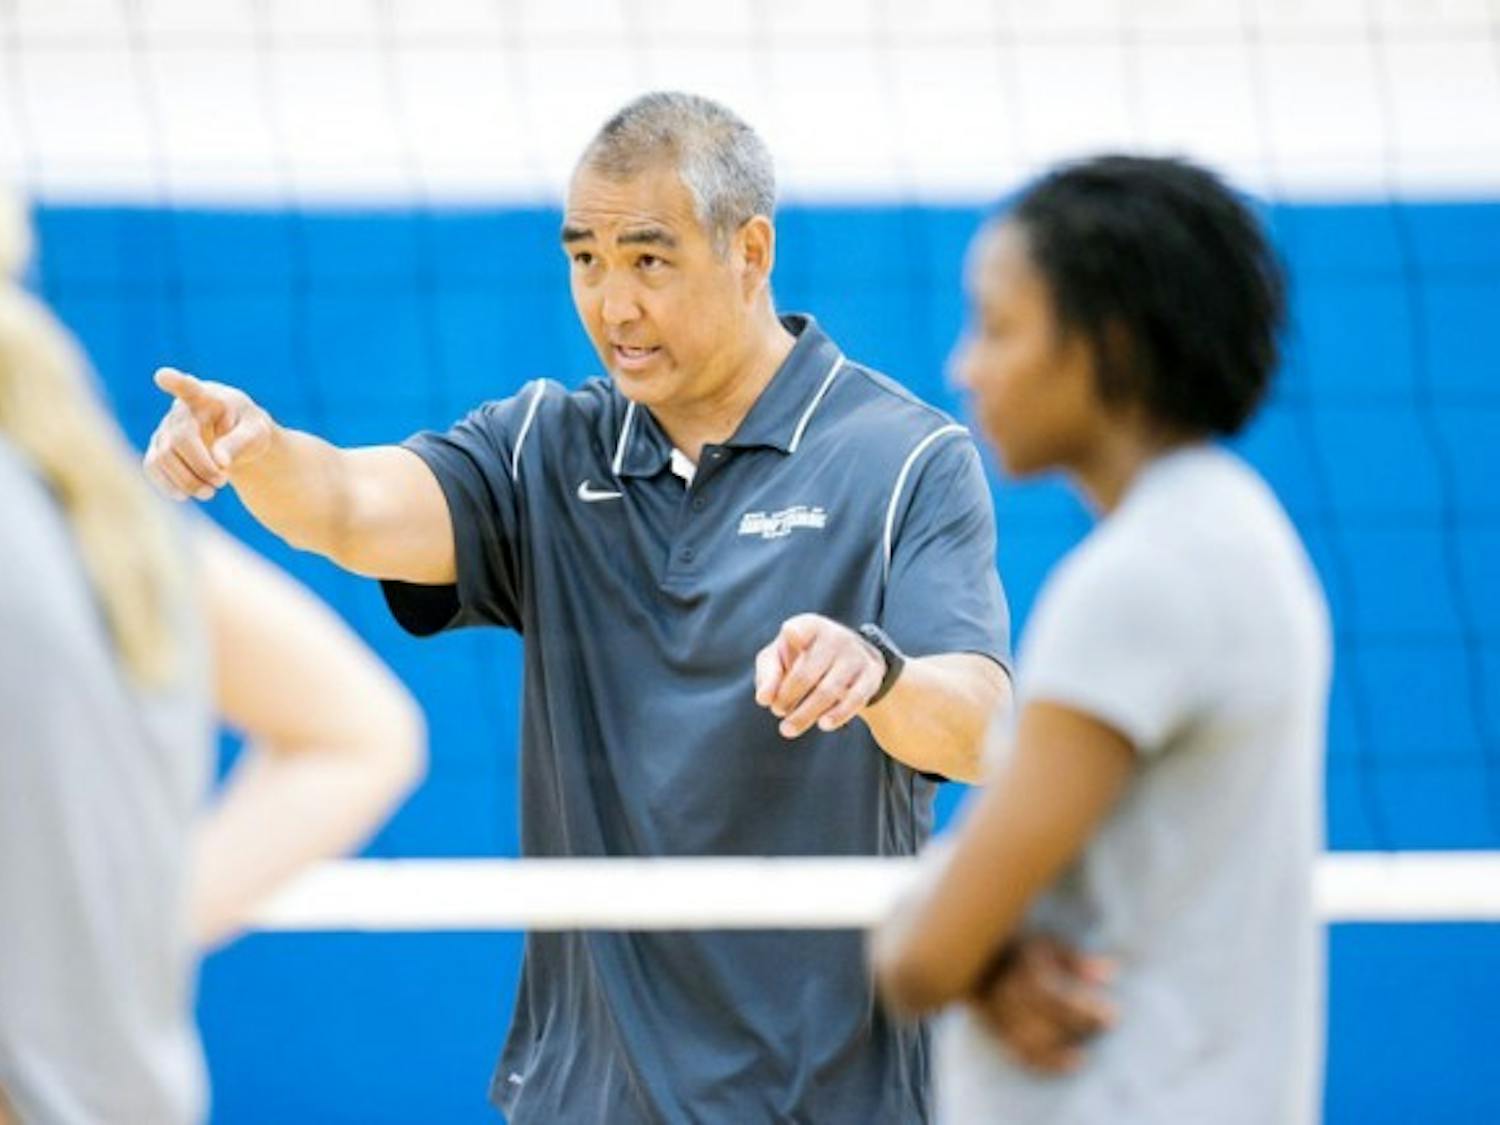 Reed Sunahara coaches a volleyball team practice during the spring season. A motorcycle accident during the height of his playing career hampered Sunahara&rsquo;s chances at making the U.S. Olympic team. But it helped start his coaching career as the new head coach of the Bulls.
Courtesy of Paul Hokanson, UB Athletics